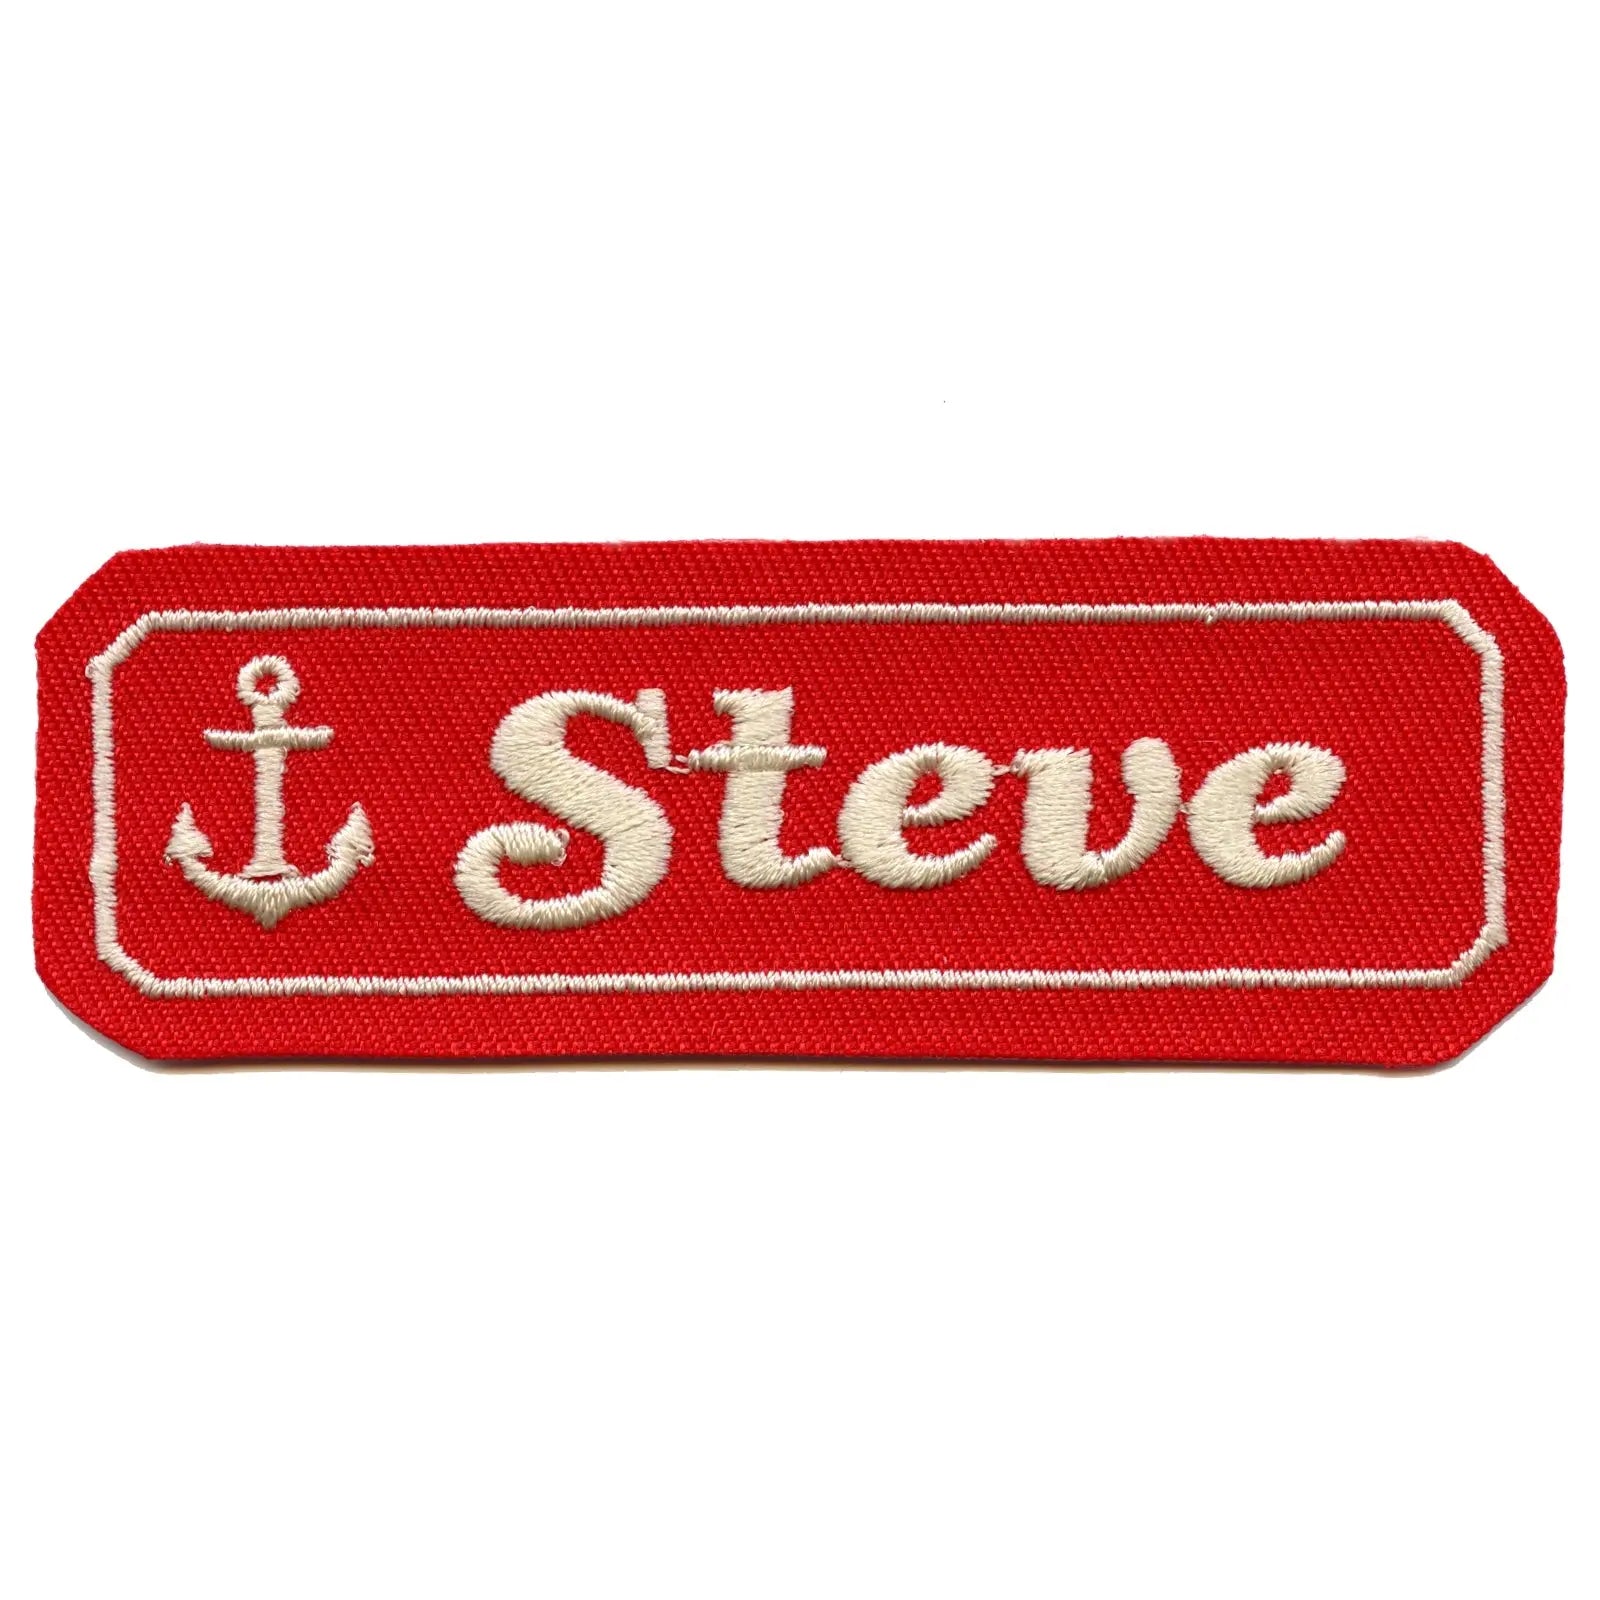 Scoops Ahoy Ice Cream Parlor "Steve" Name Tag Logo Iron On Costume Patch 